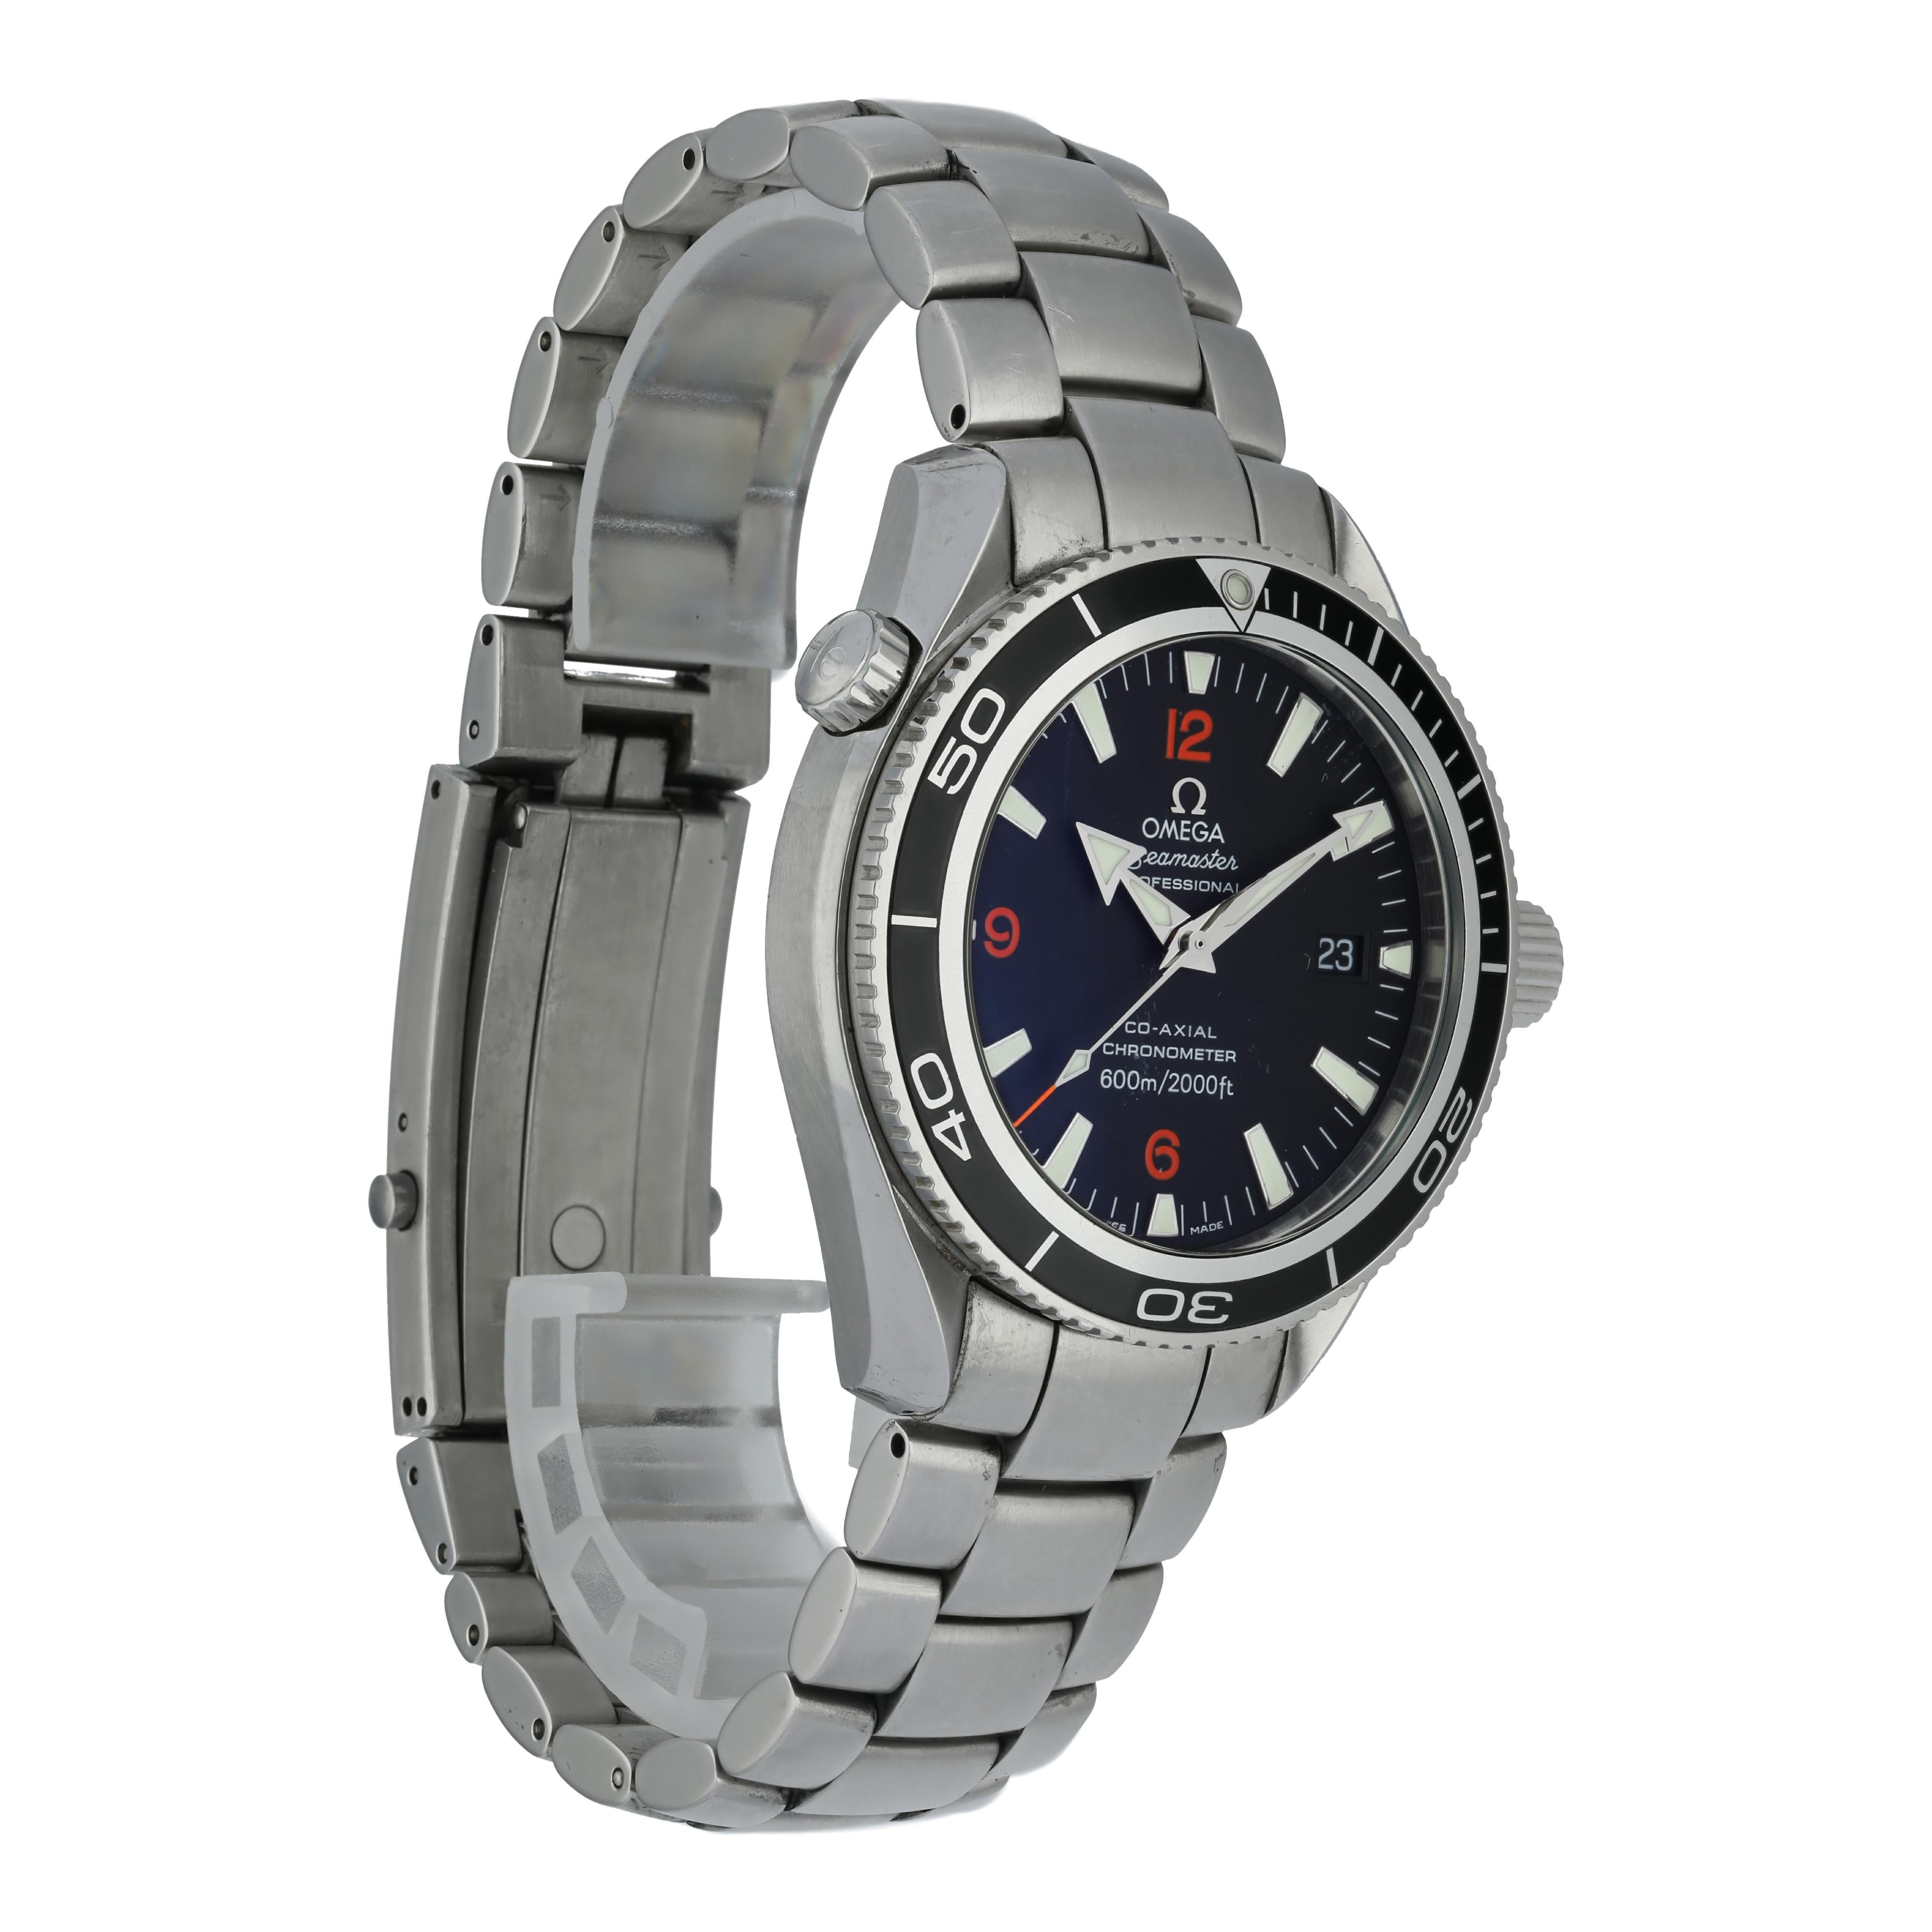 Omega Seamaster Planet Ocean 2201.51.00 Men's Watch In Excellent Condition For Sale In New York, NY